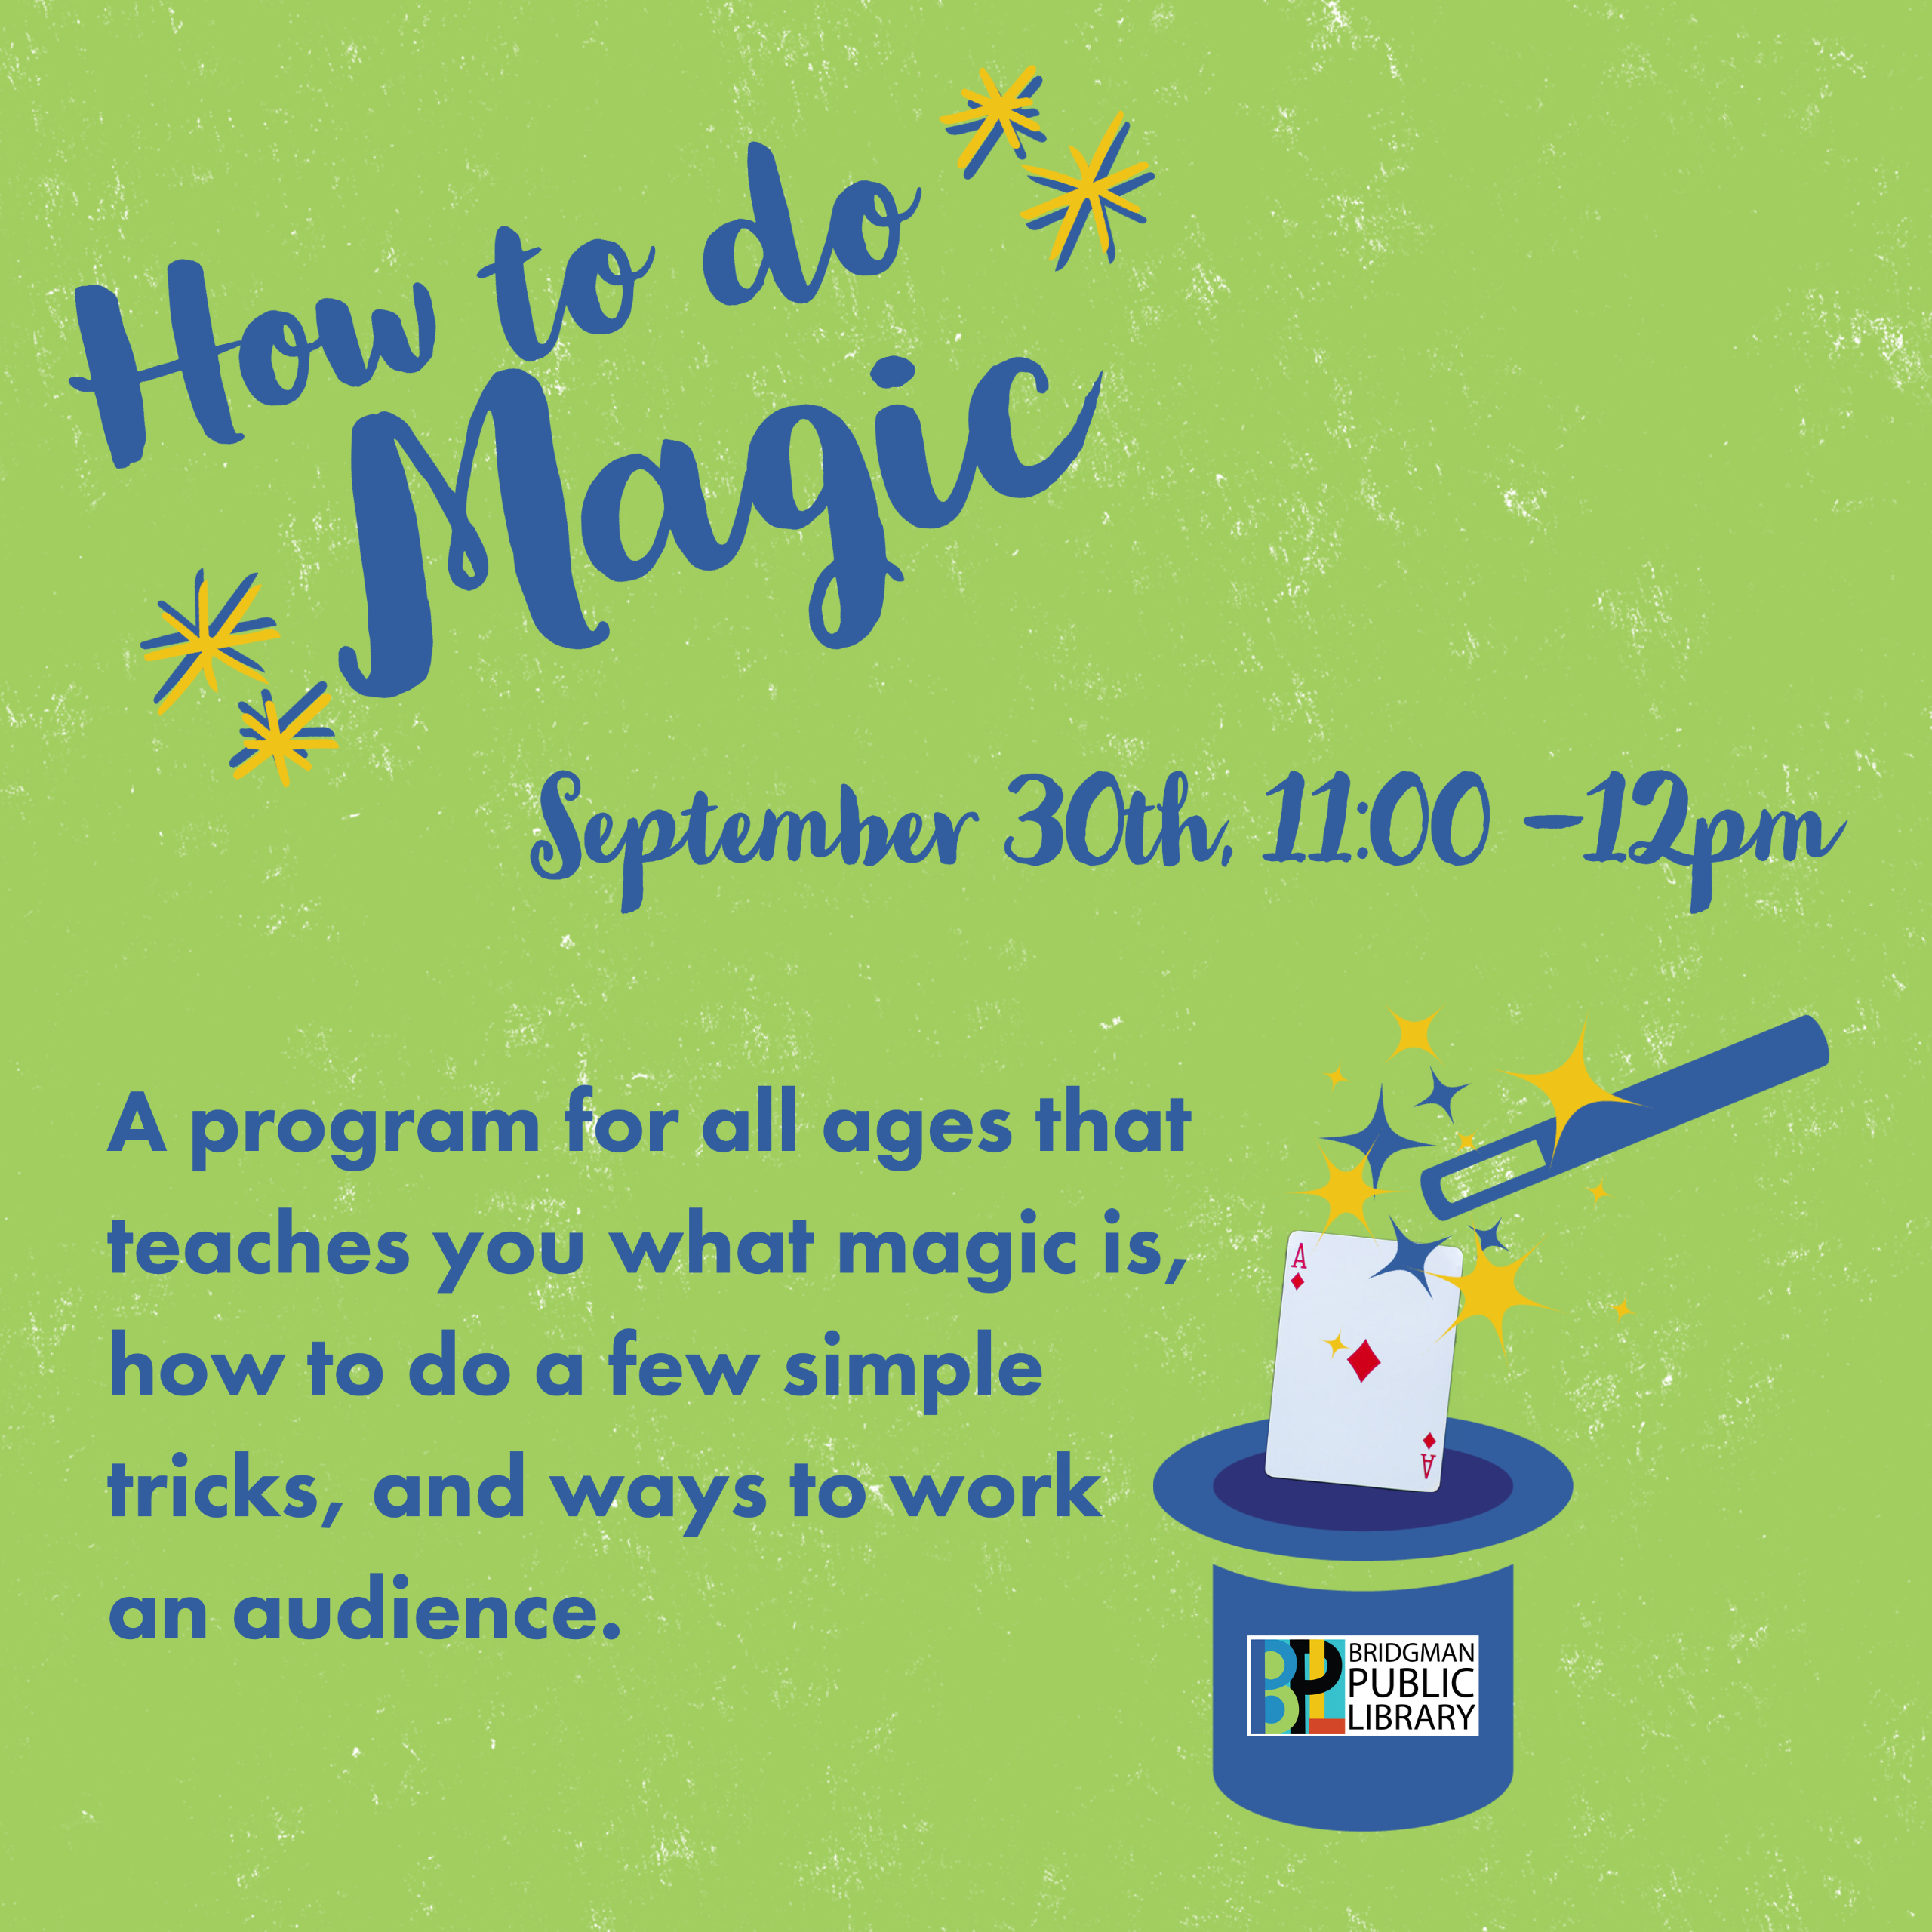 A program to learn what magic is, how to do a few simple tricks and how to work an audience.